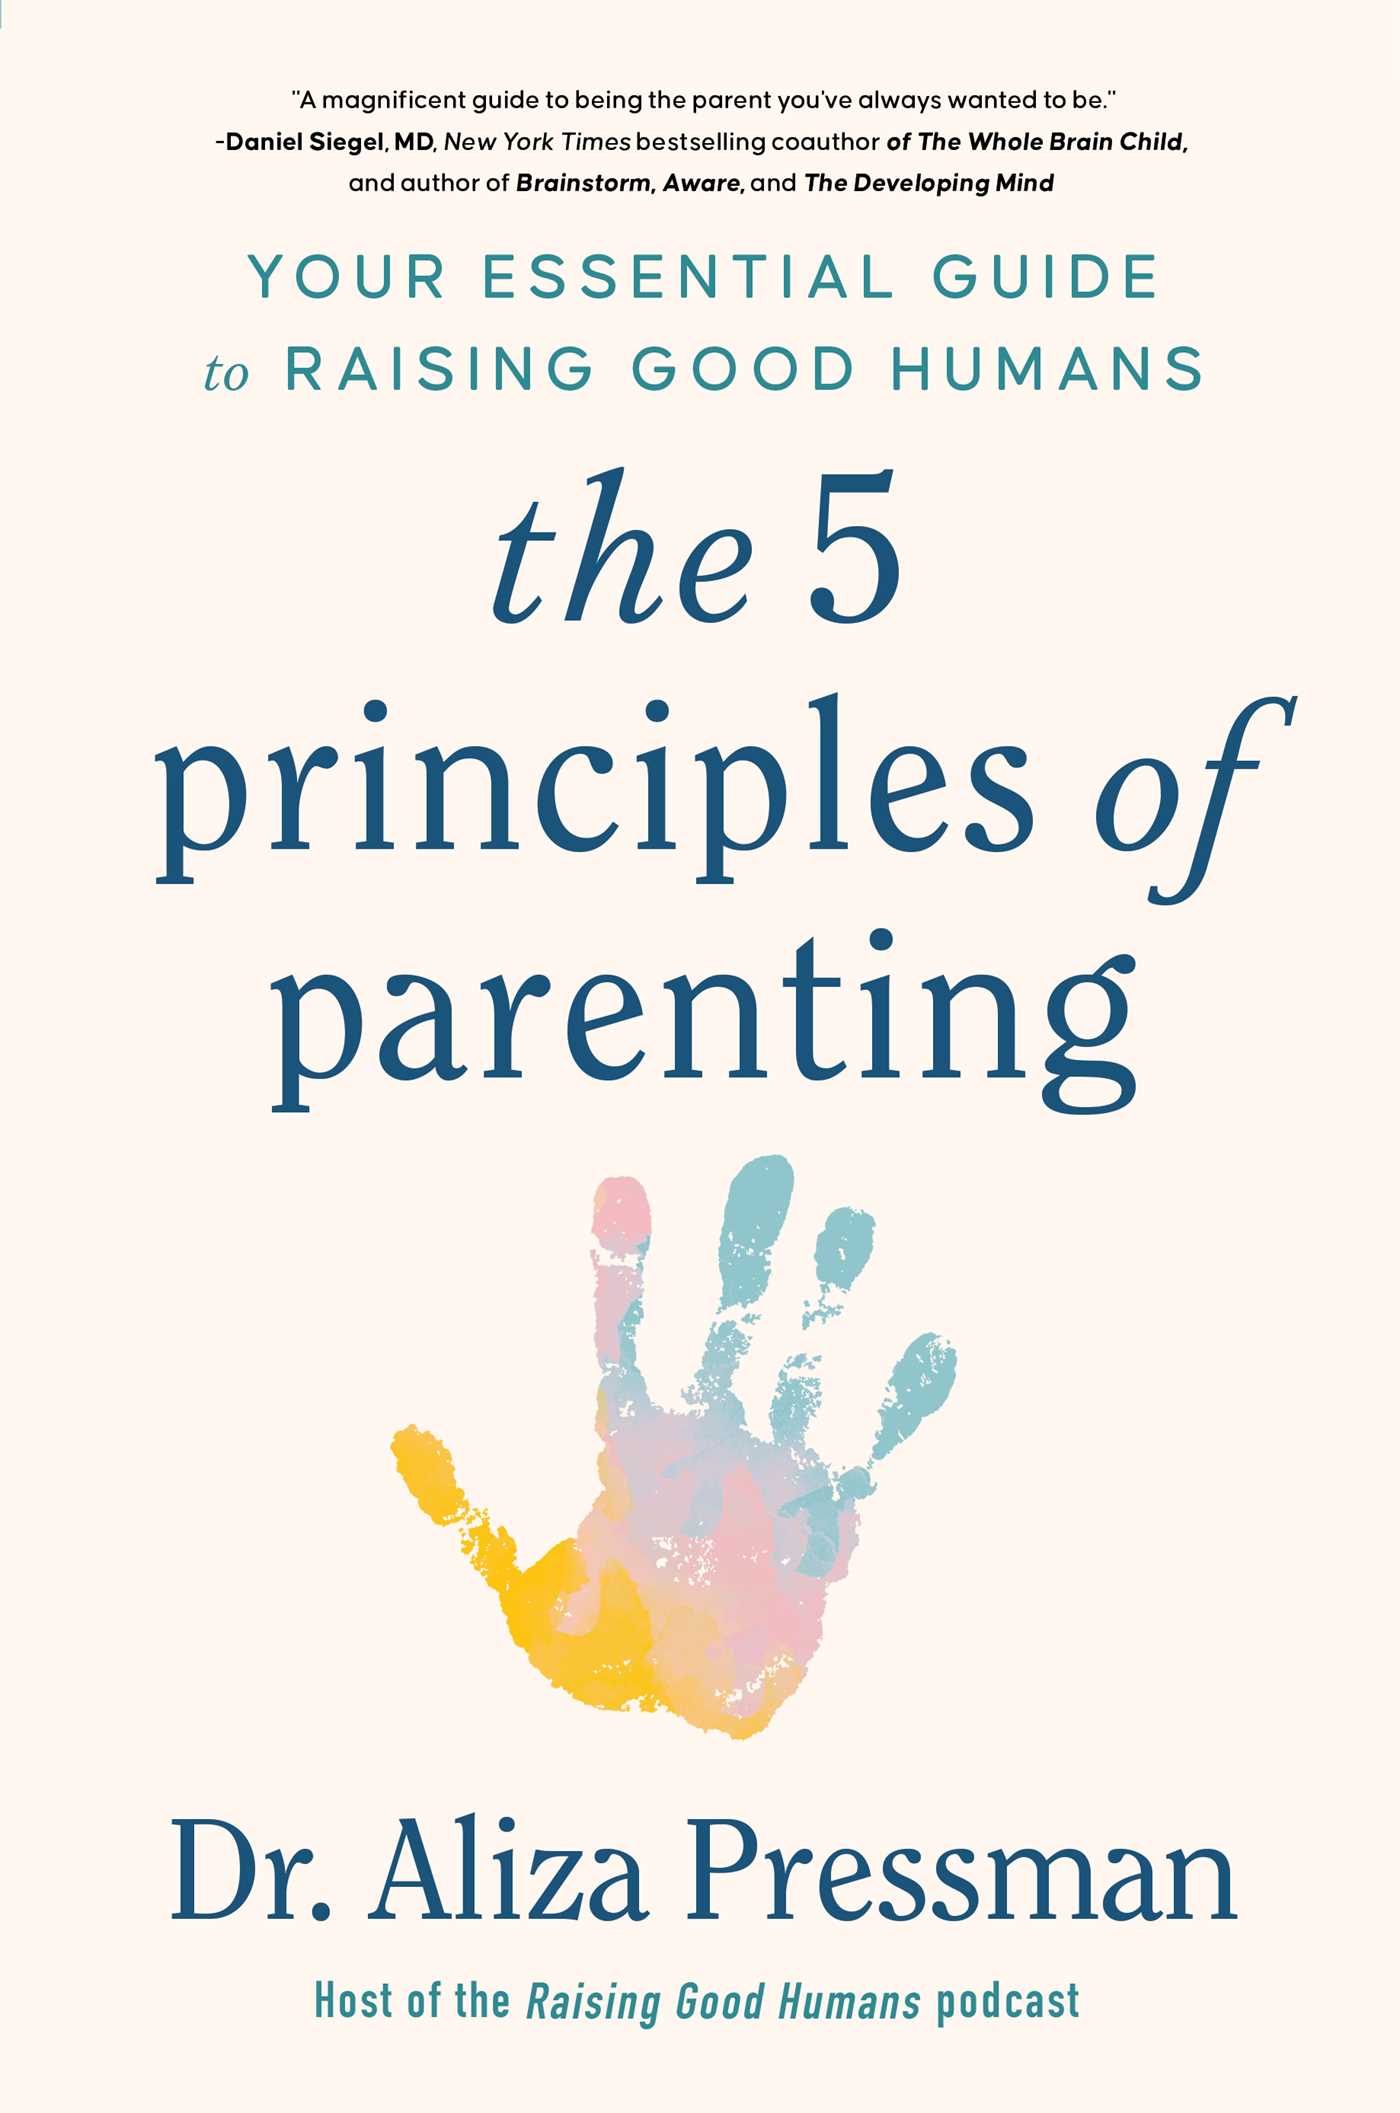 Image for "The 5 Principles of Parenting"